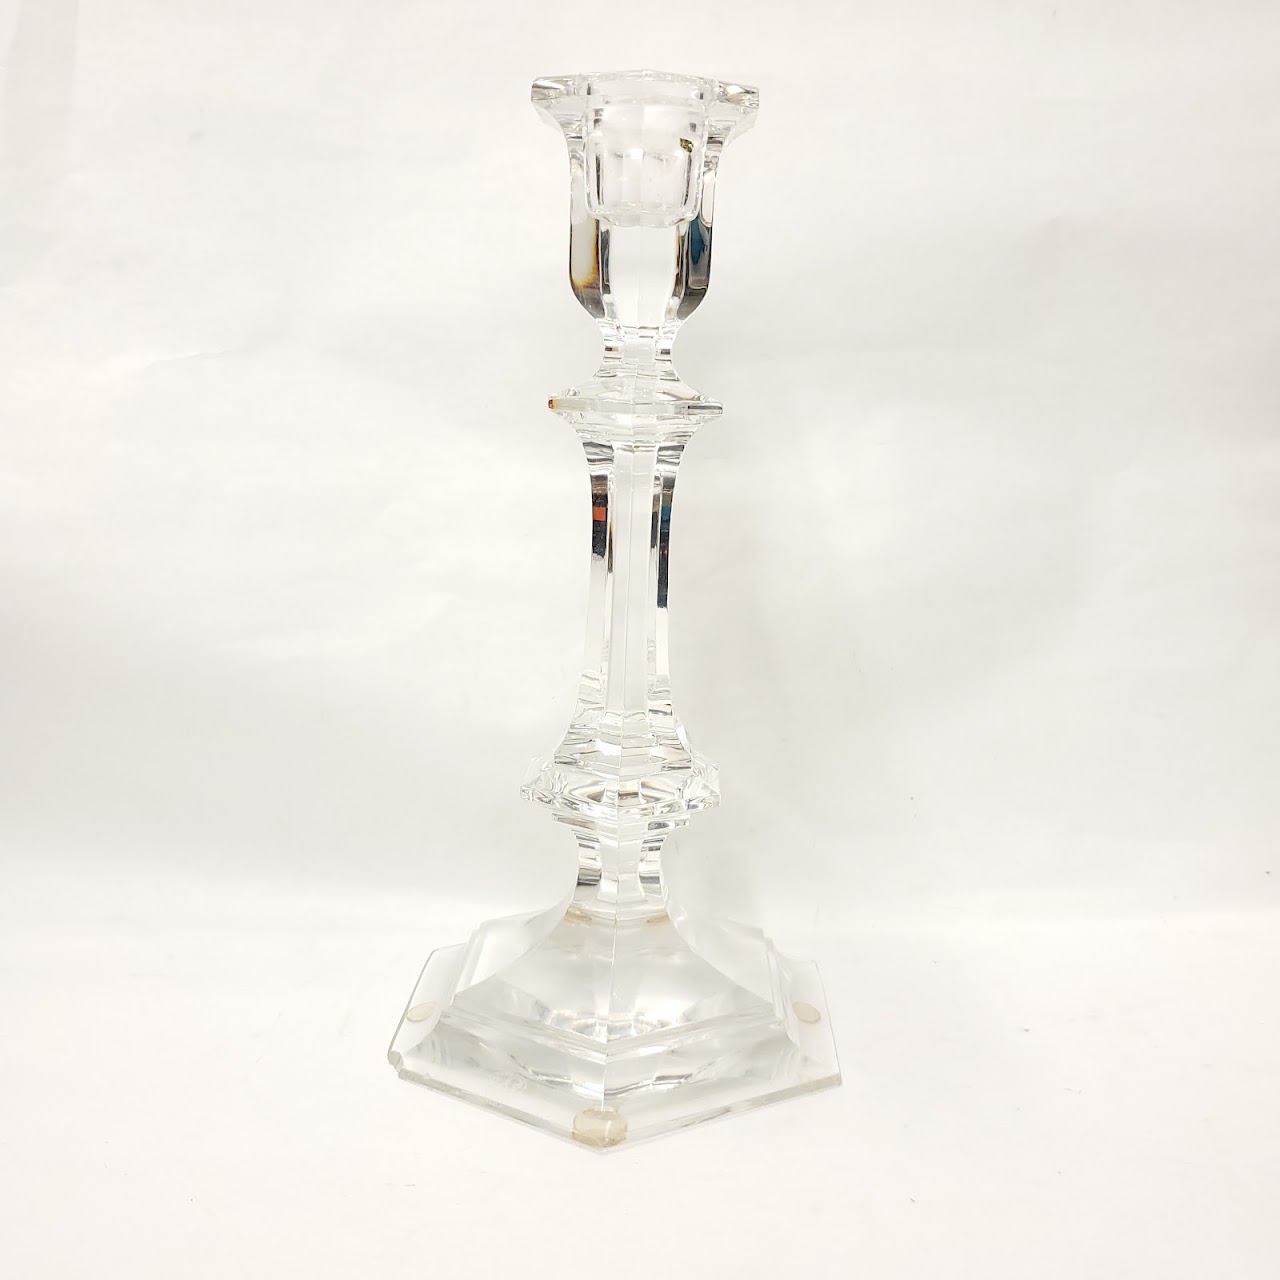 Baccarat Crystal Harcourt Candlestick Pair